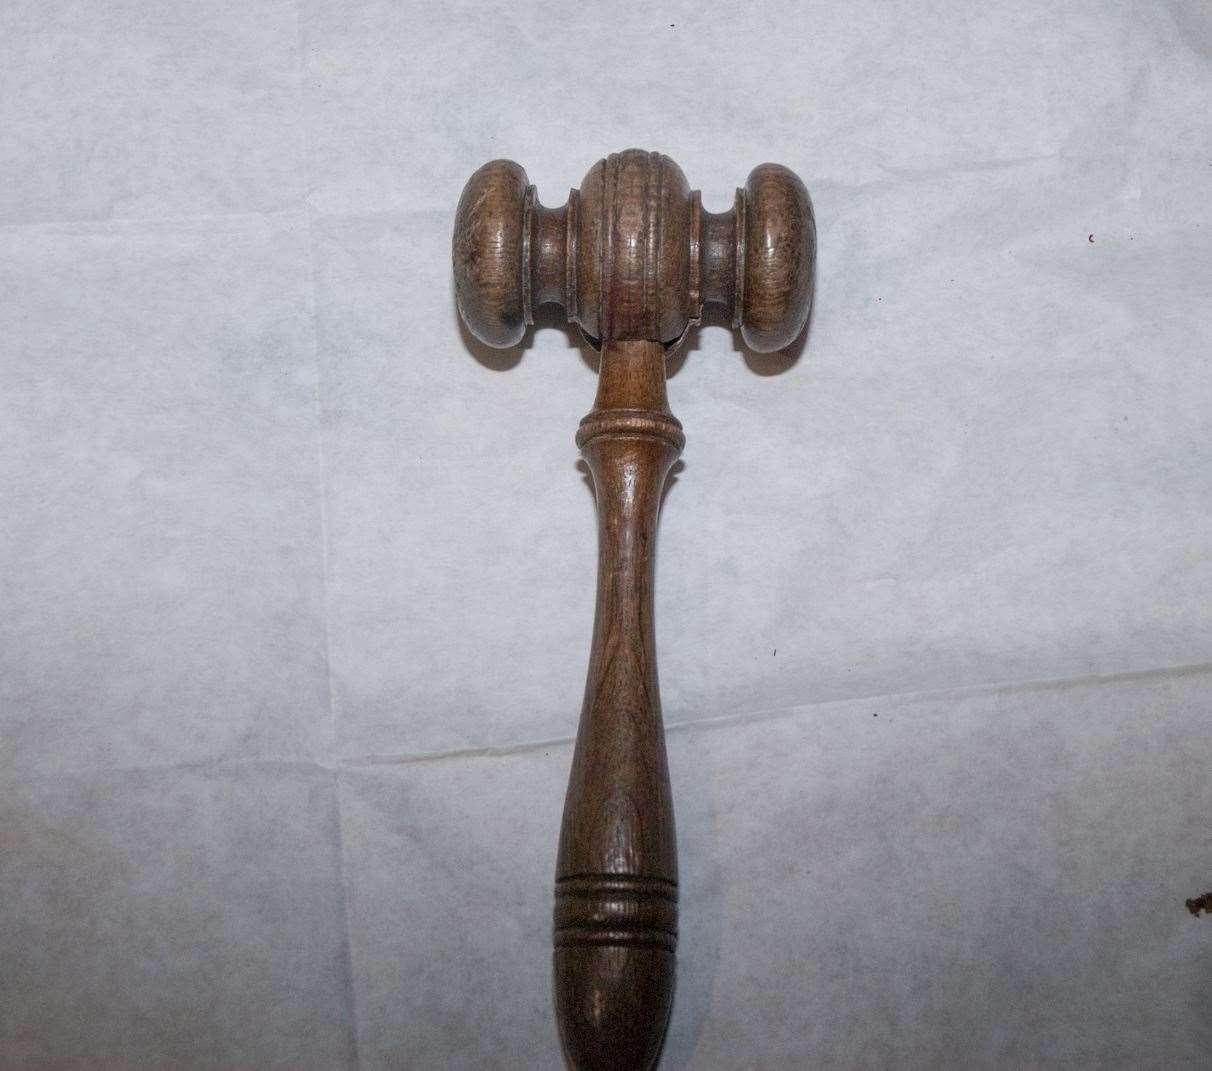 Guy Malbec's wooden judges' gavel used in the attack. Picture: CPS